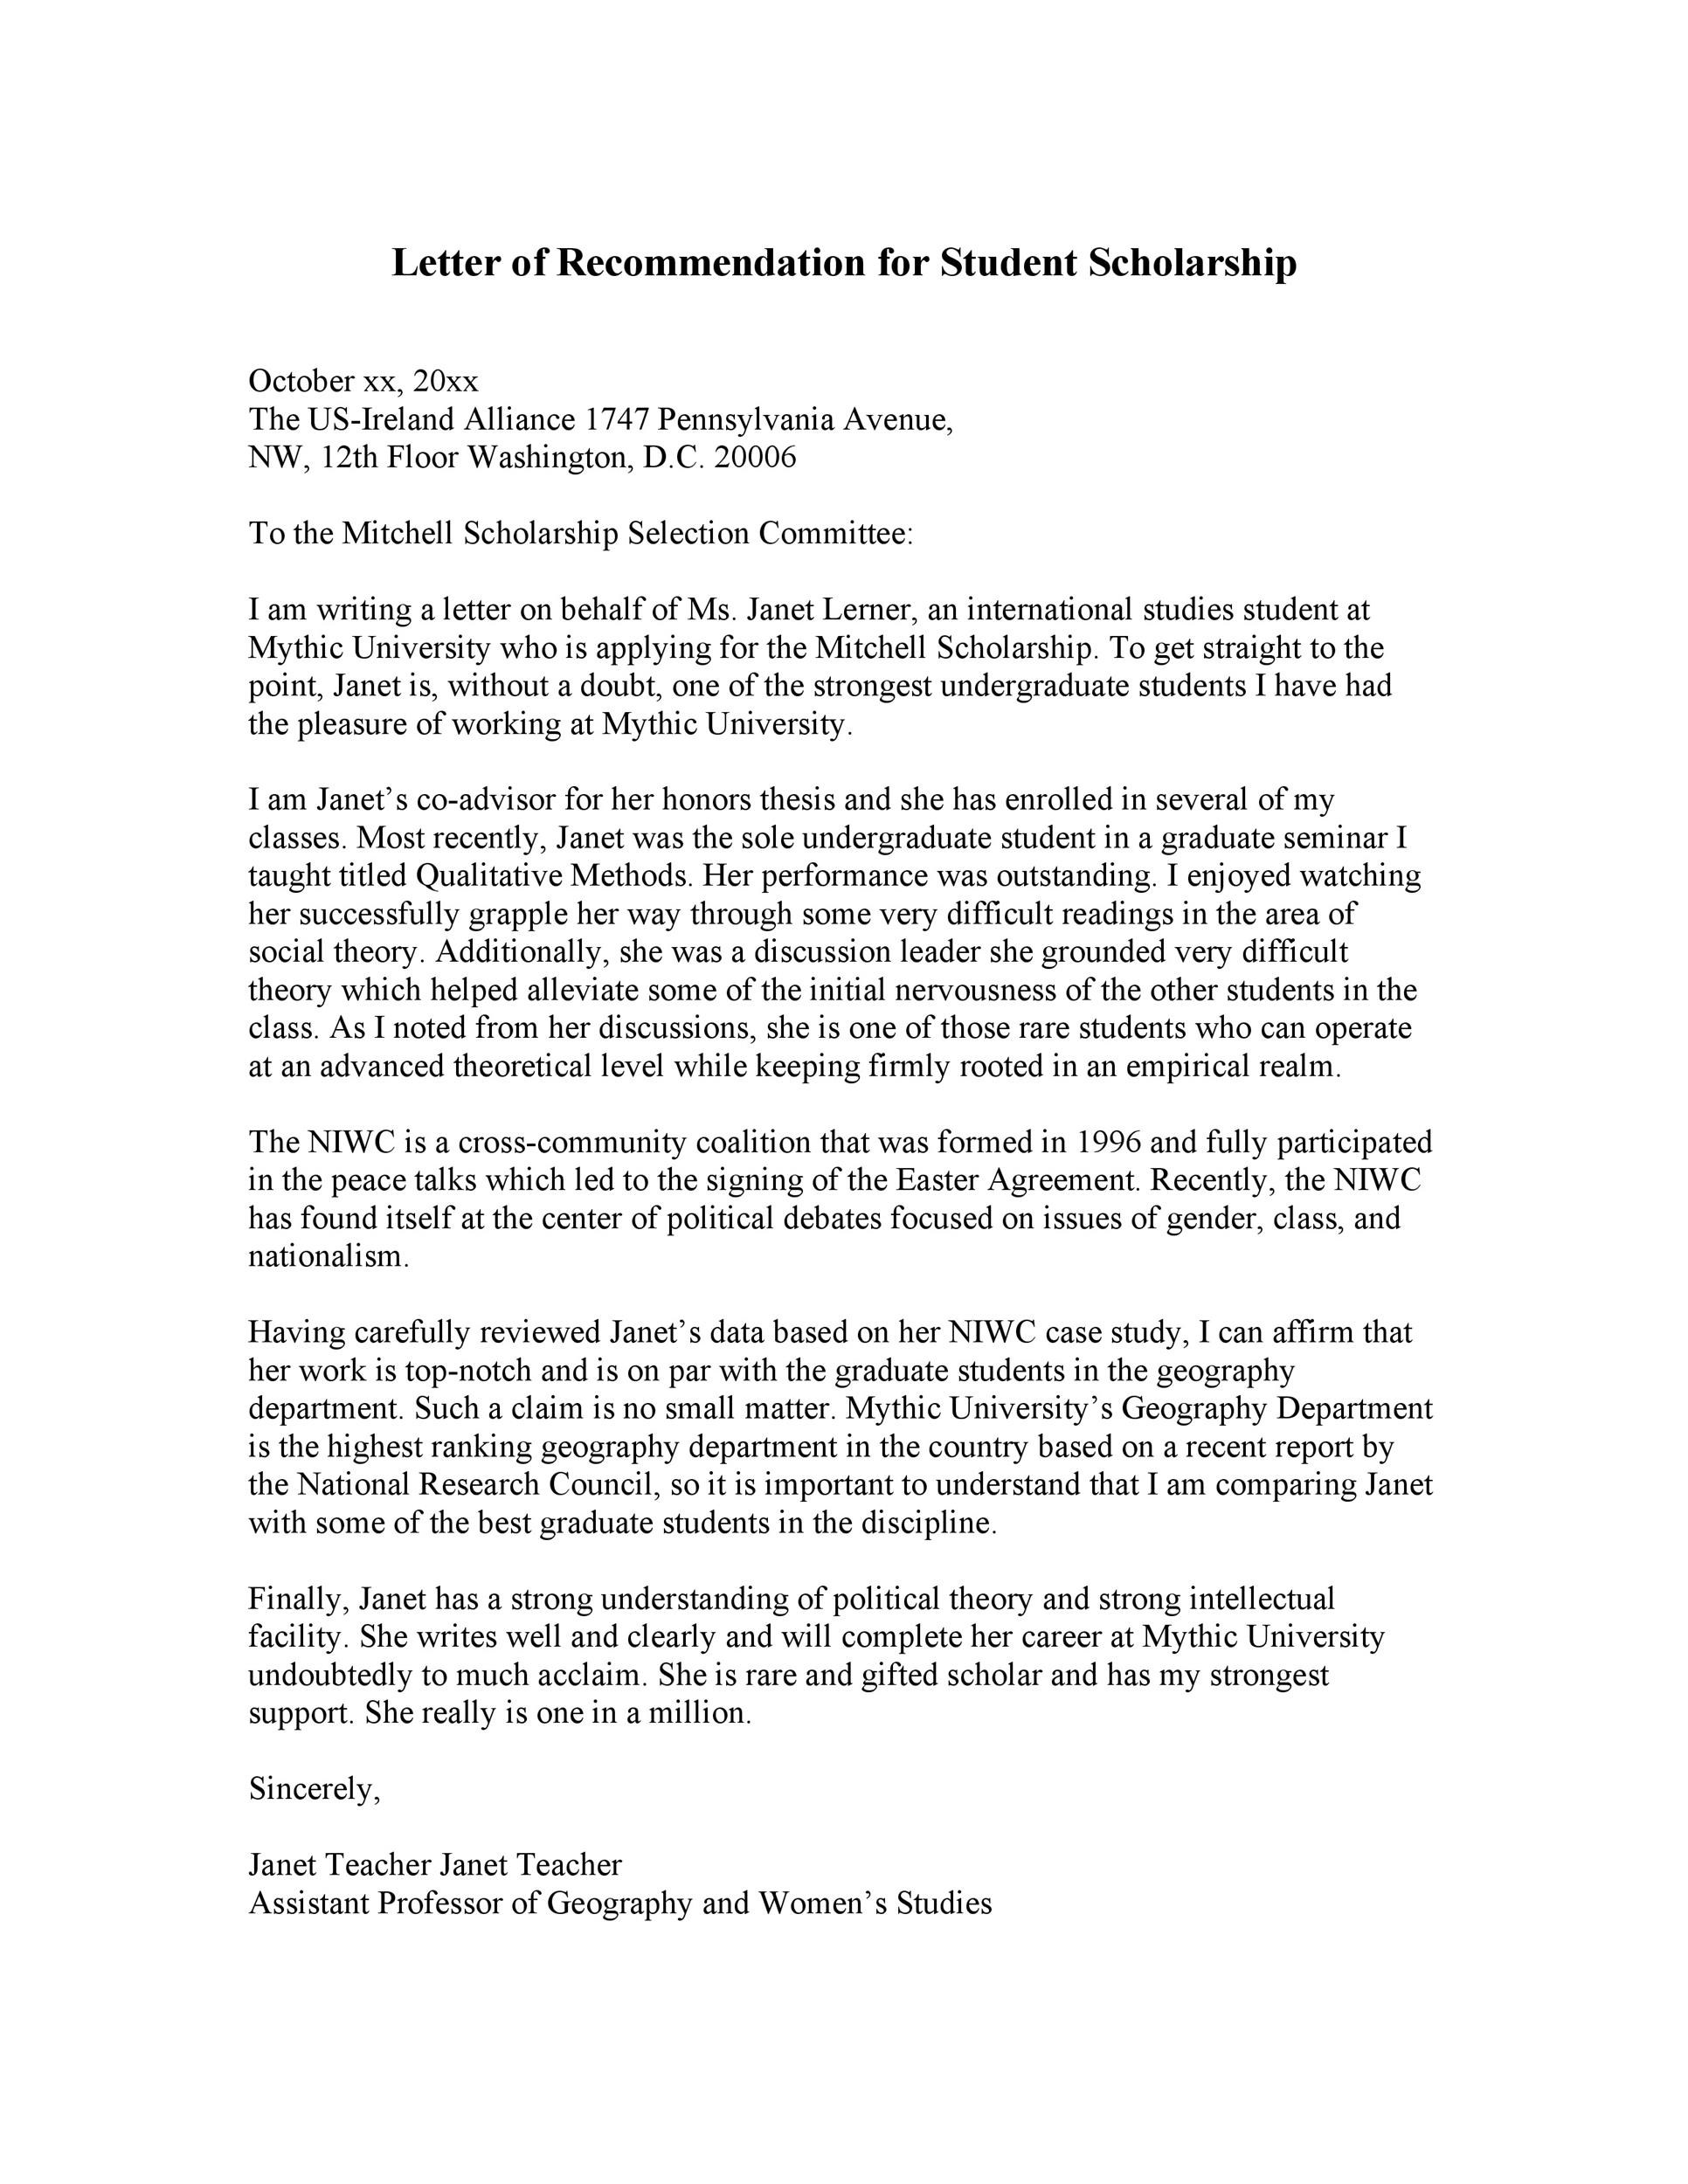 Sample Scholarship Letter Of Recommendation from templatelab.com